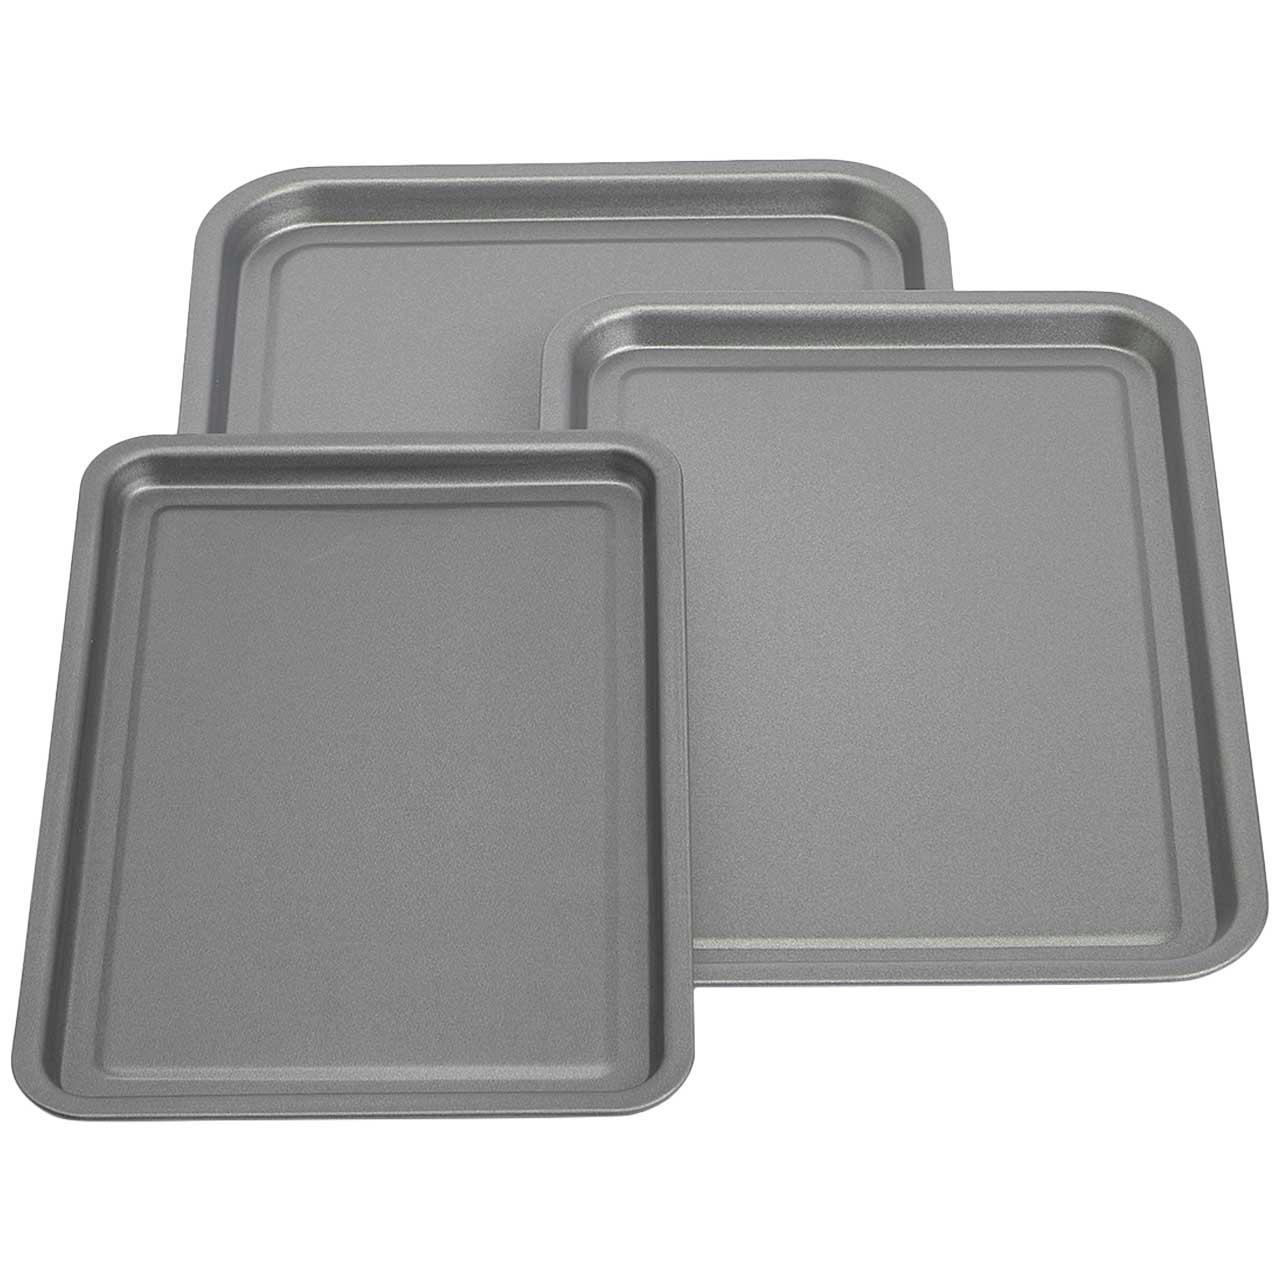 M&S 3pk Oven Trays, Silver